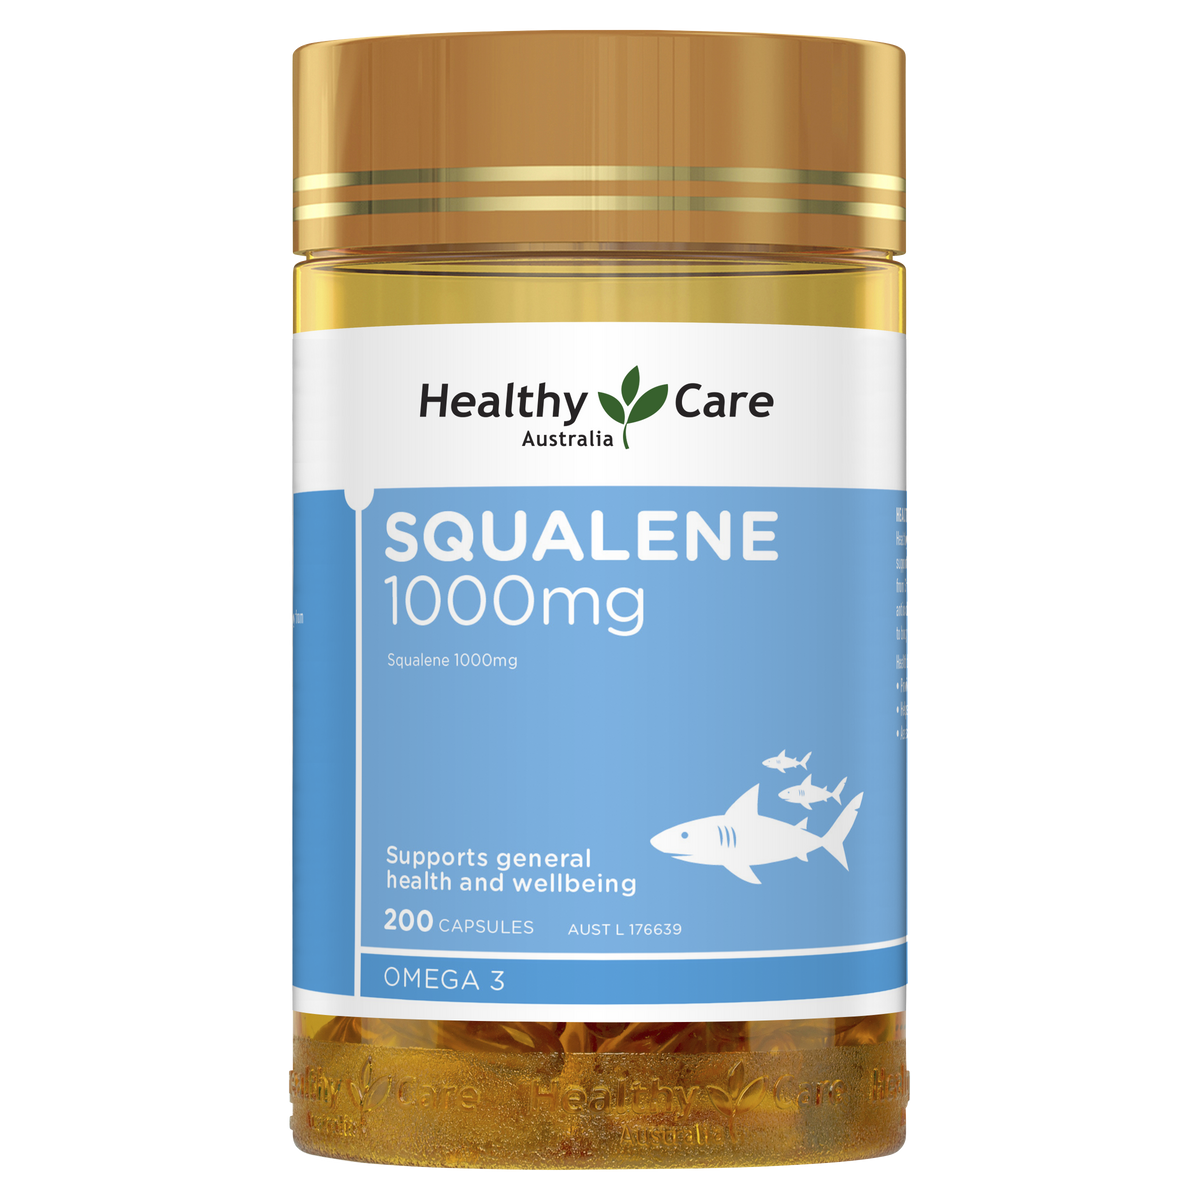 Healthy Care Squalene 1000mg - 200 Capsules